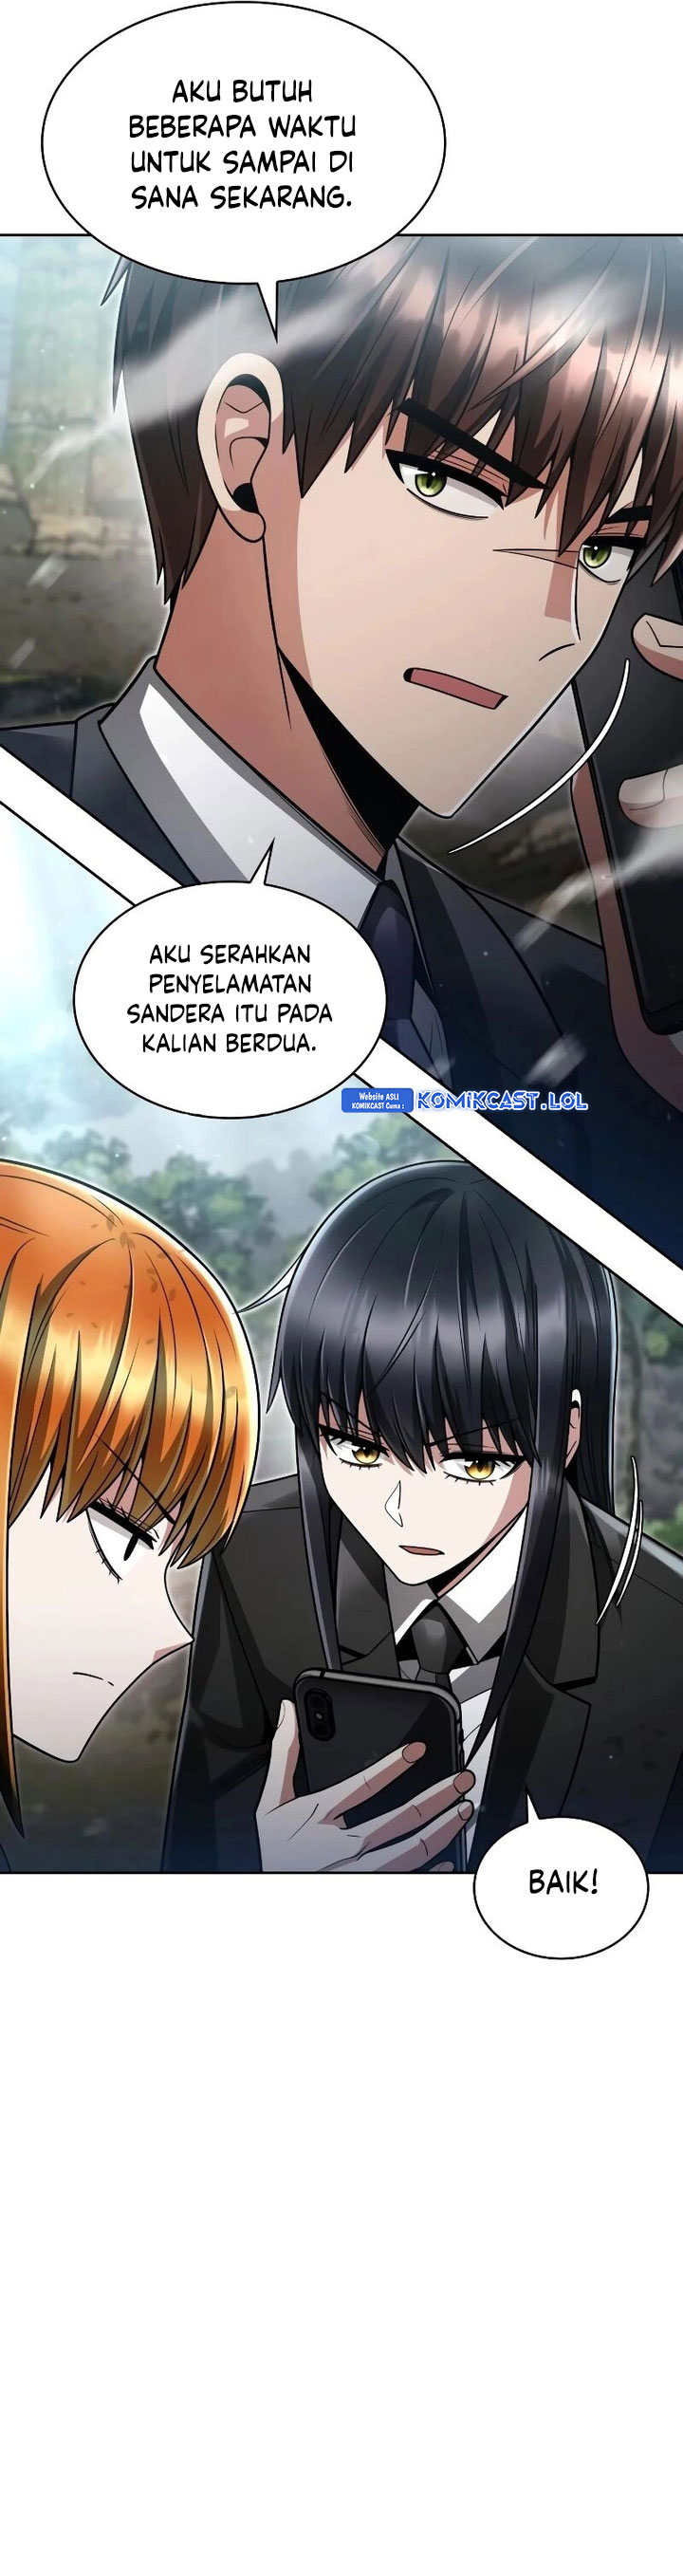 Dilarang COPAS - situs resmi www.mangacanblog.com - Komik clever cleaning life of the returned genius hunter 065 - chapter 65 66 Indonesia clever cleaning life of the returned genius hunter 065 - chapter 65 Terbaru 17|Baca Manga Komik Indonesia|Mangacan